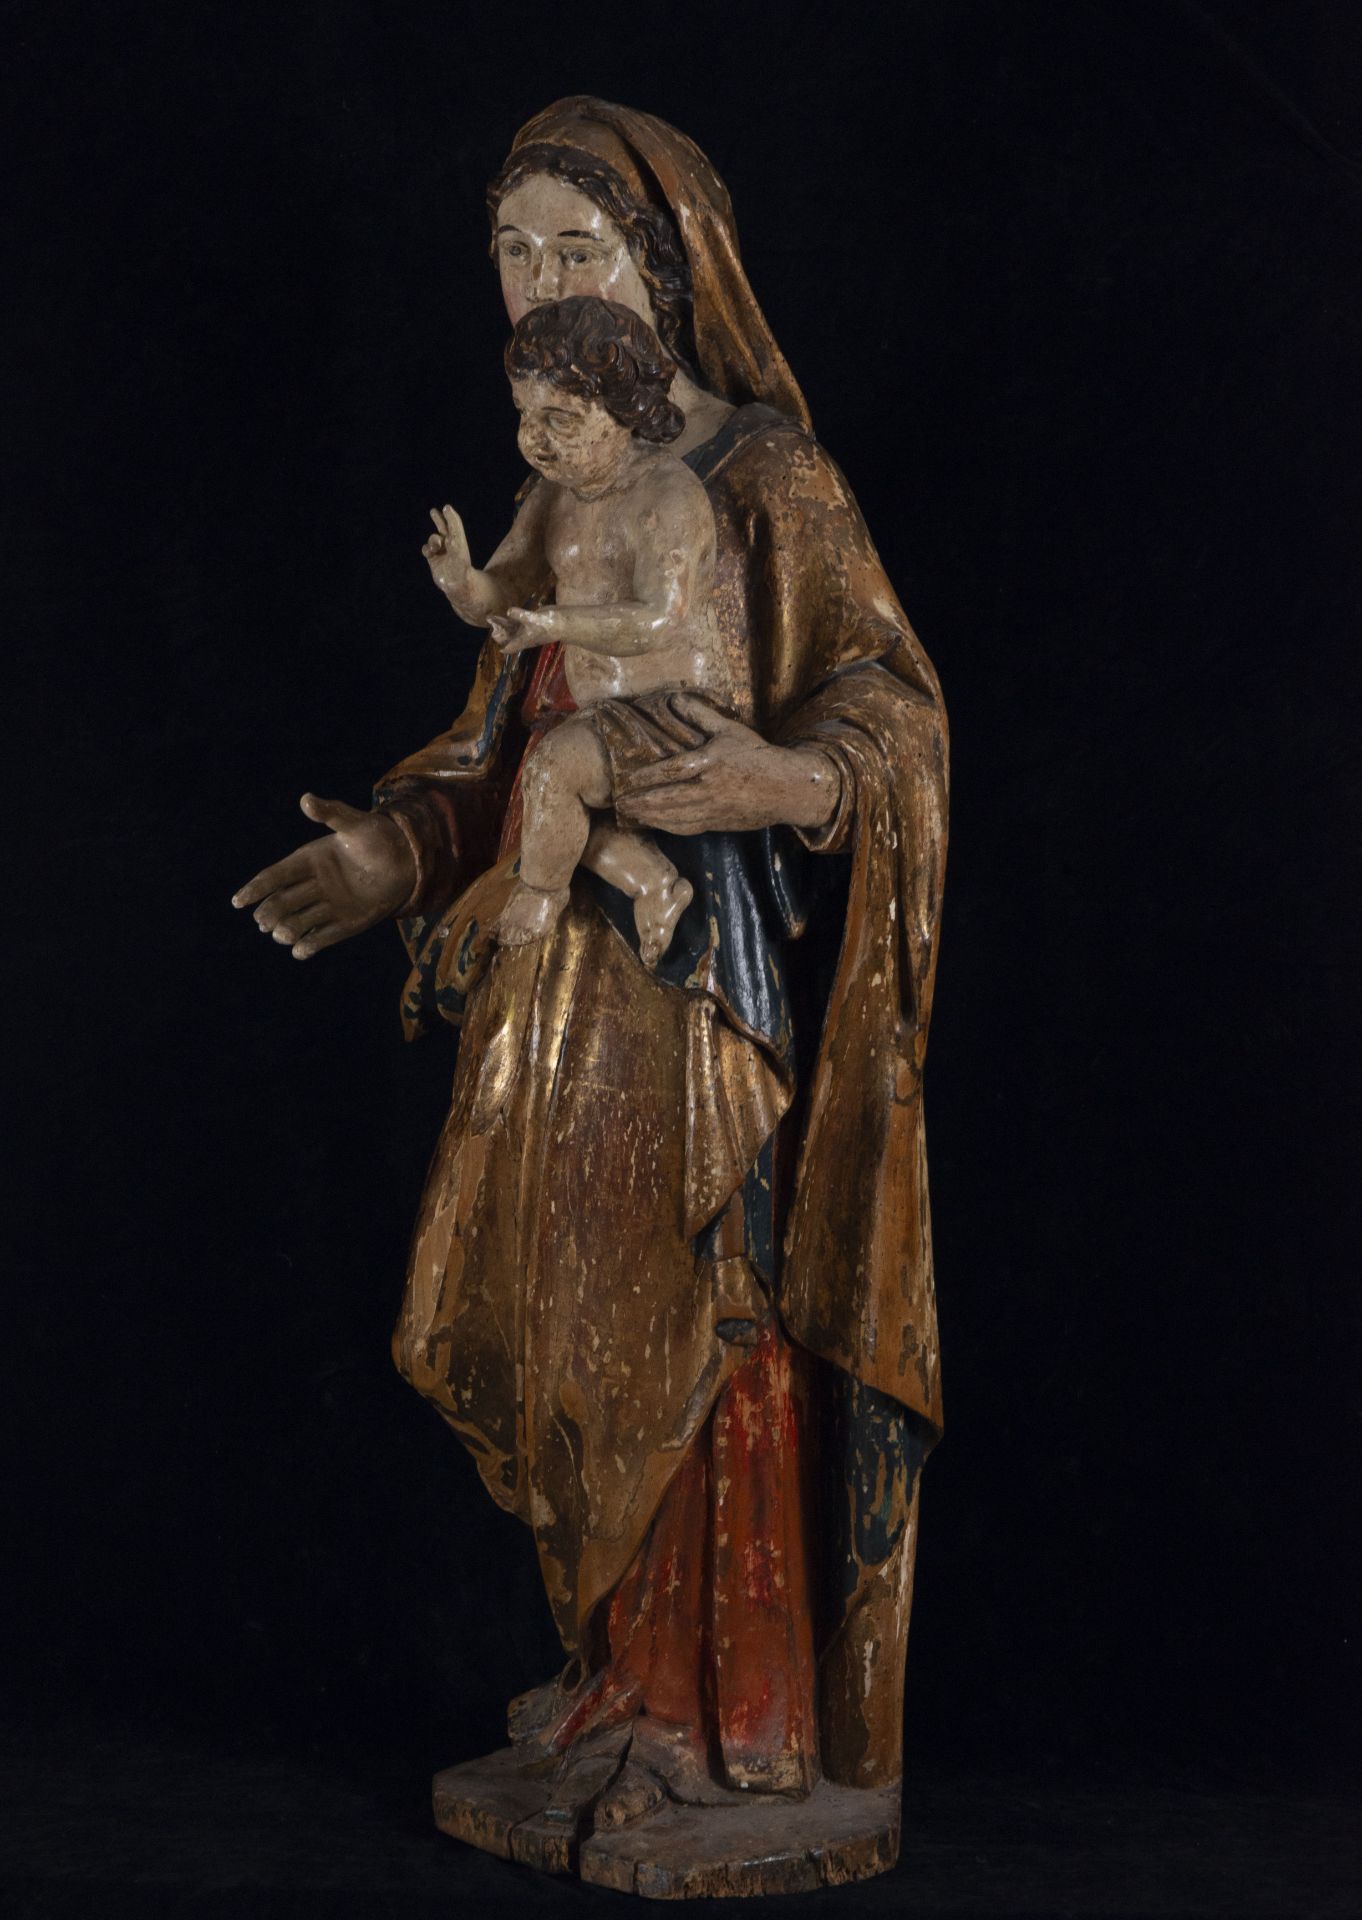 Madonna with Child in polychrome Walnut wood, South German school of the early 16th century - Image 2 of 4